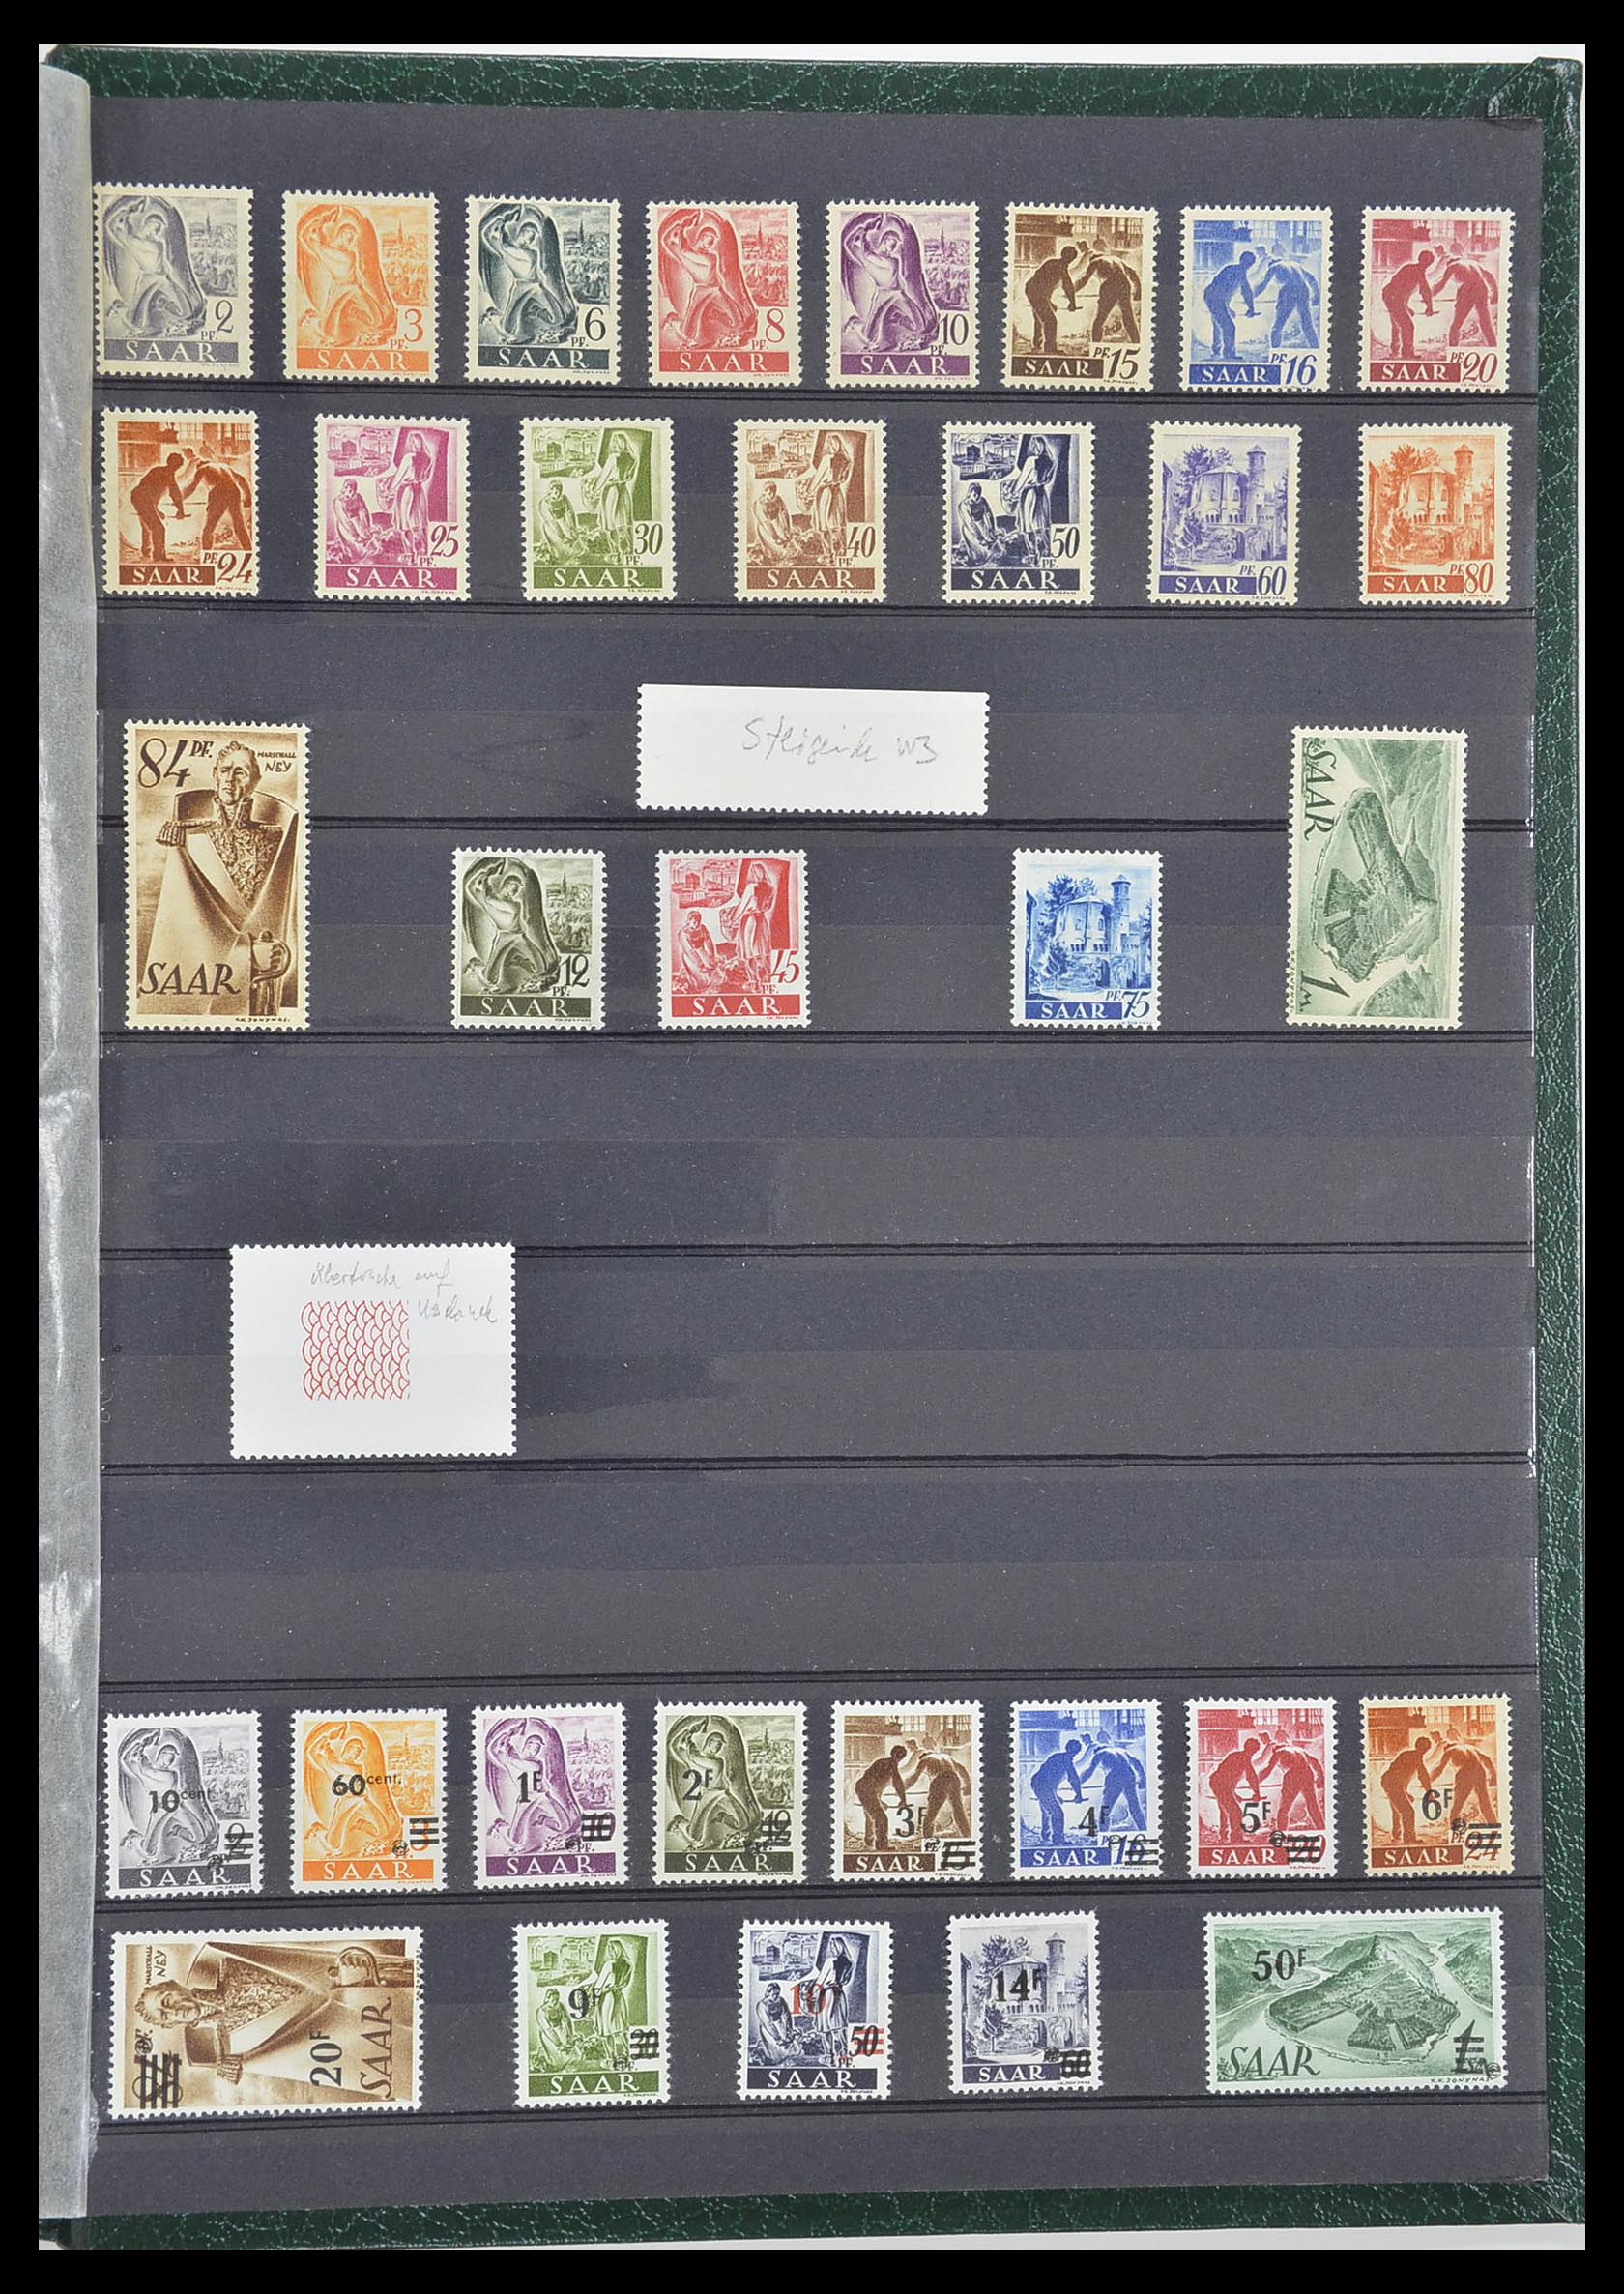 33553 087 - Stamp collection 33553 German territories and occupations 1939-1948.